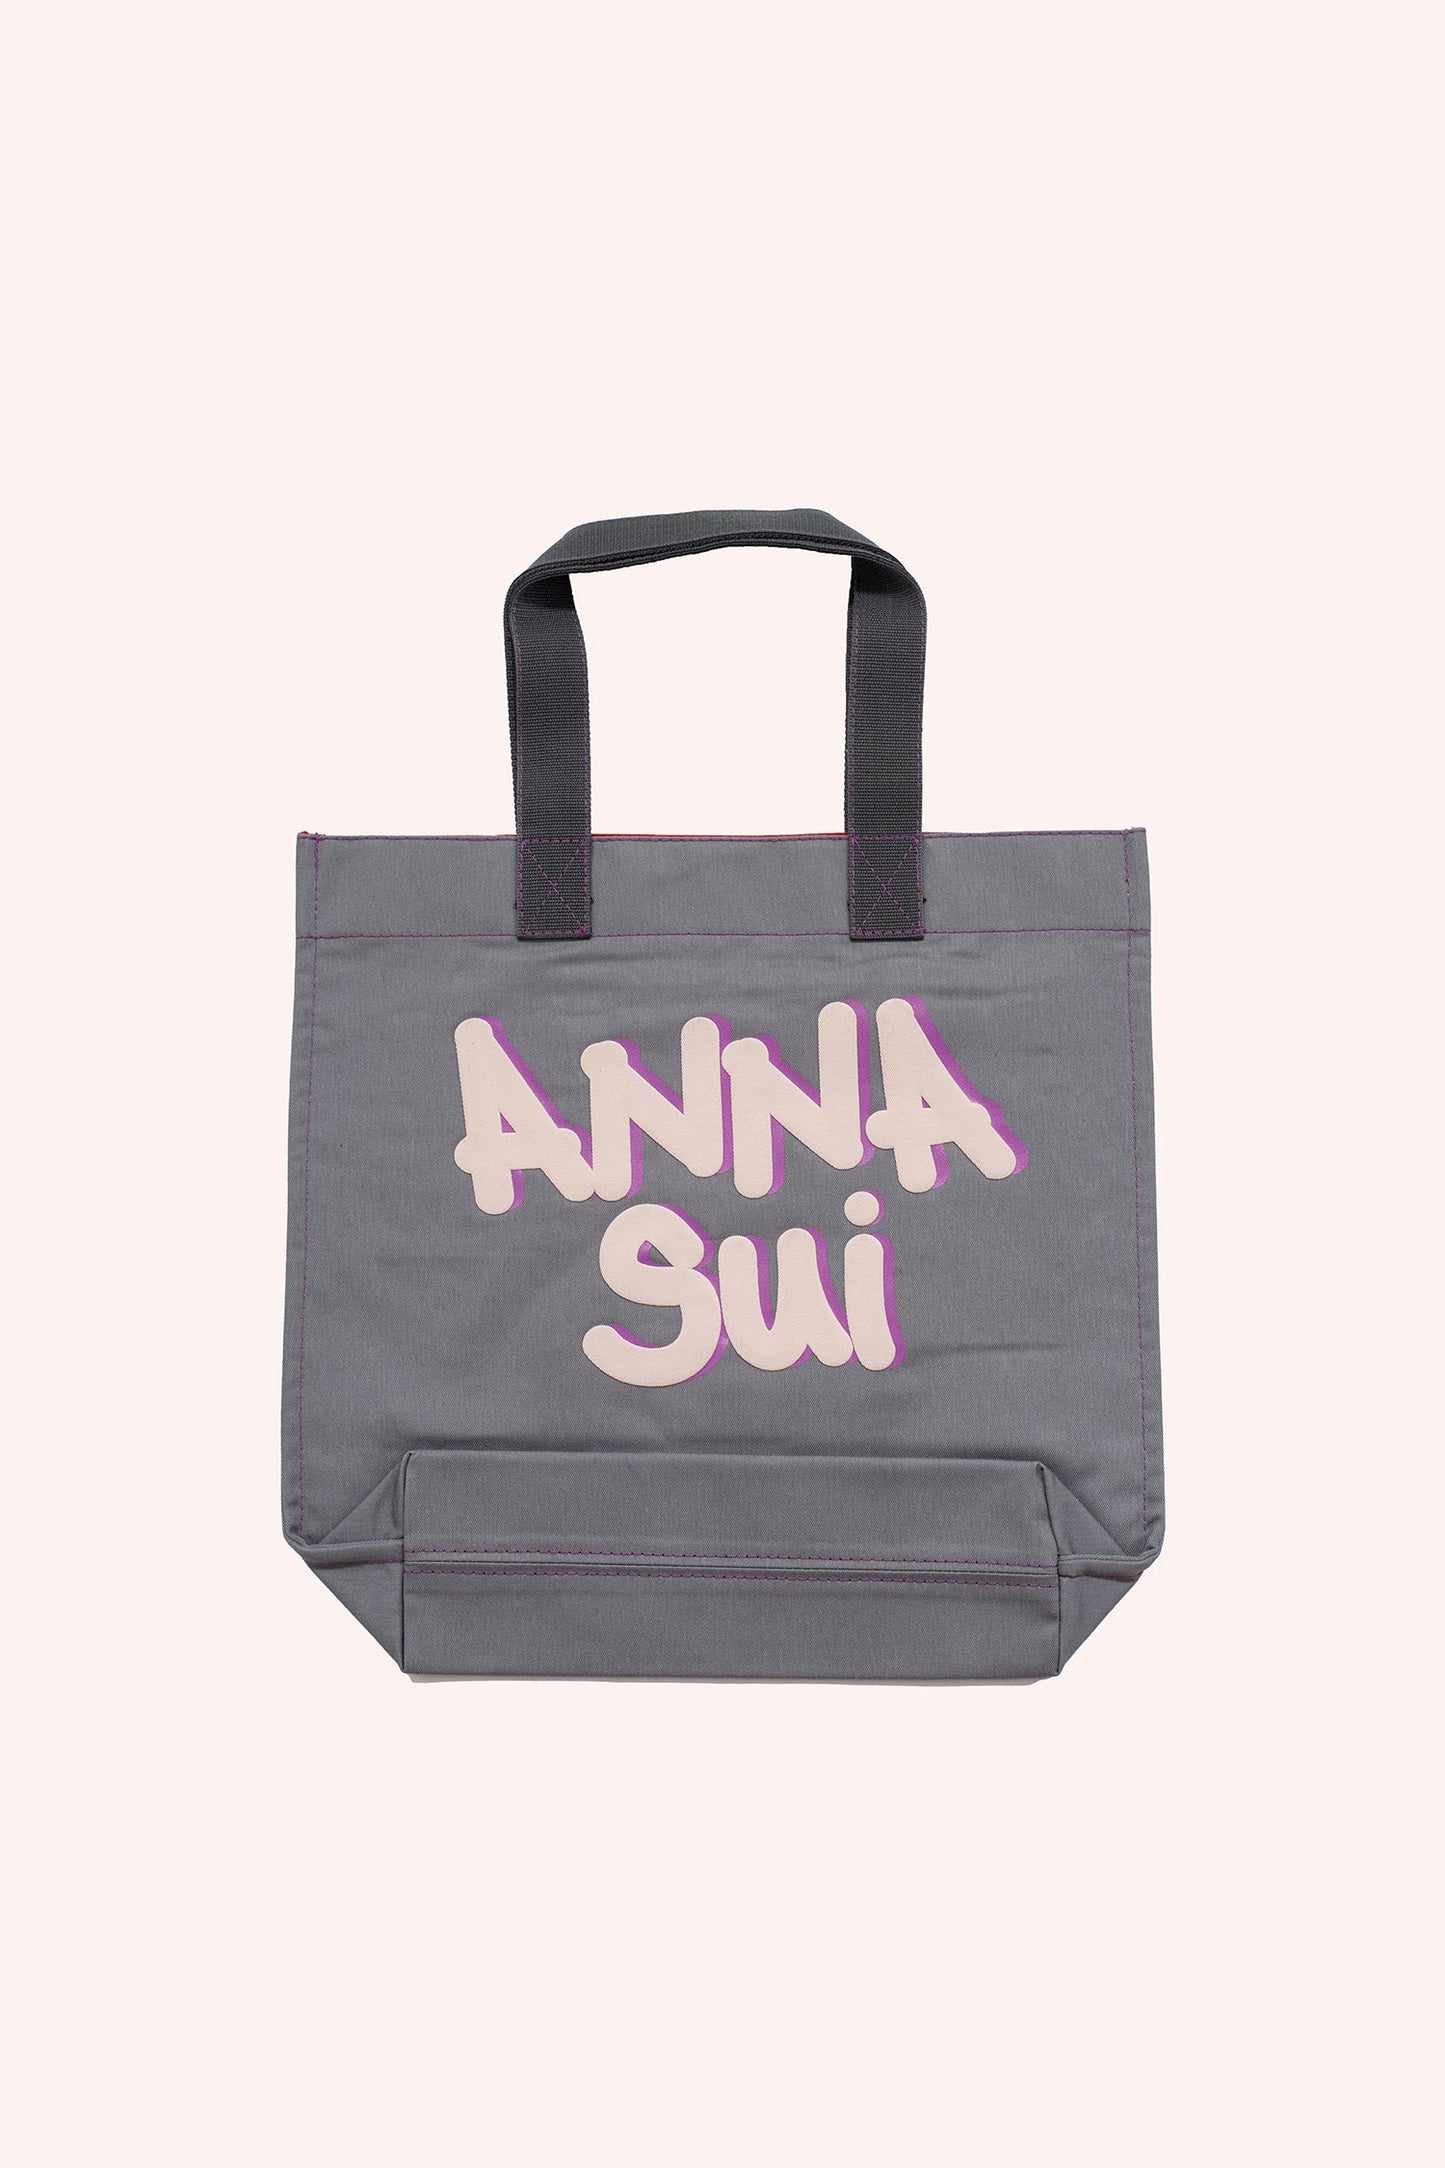 Tote bag, squared, darker grey handles, red stiches lines, Anna Sui branding on the other side